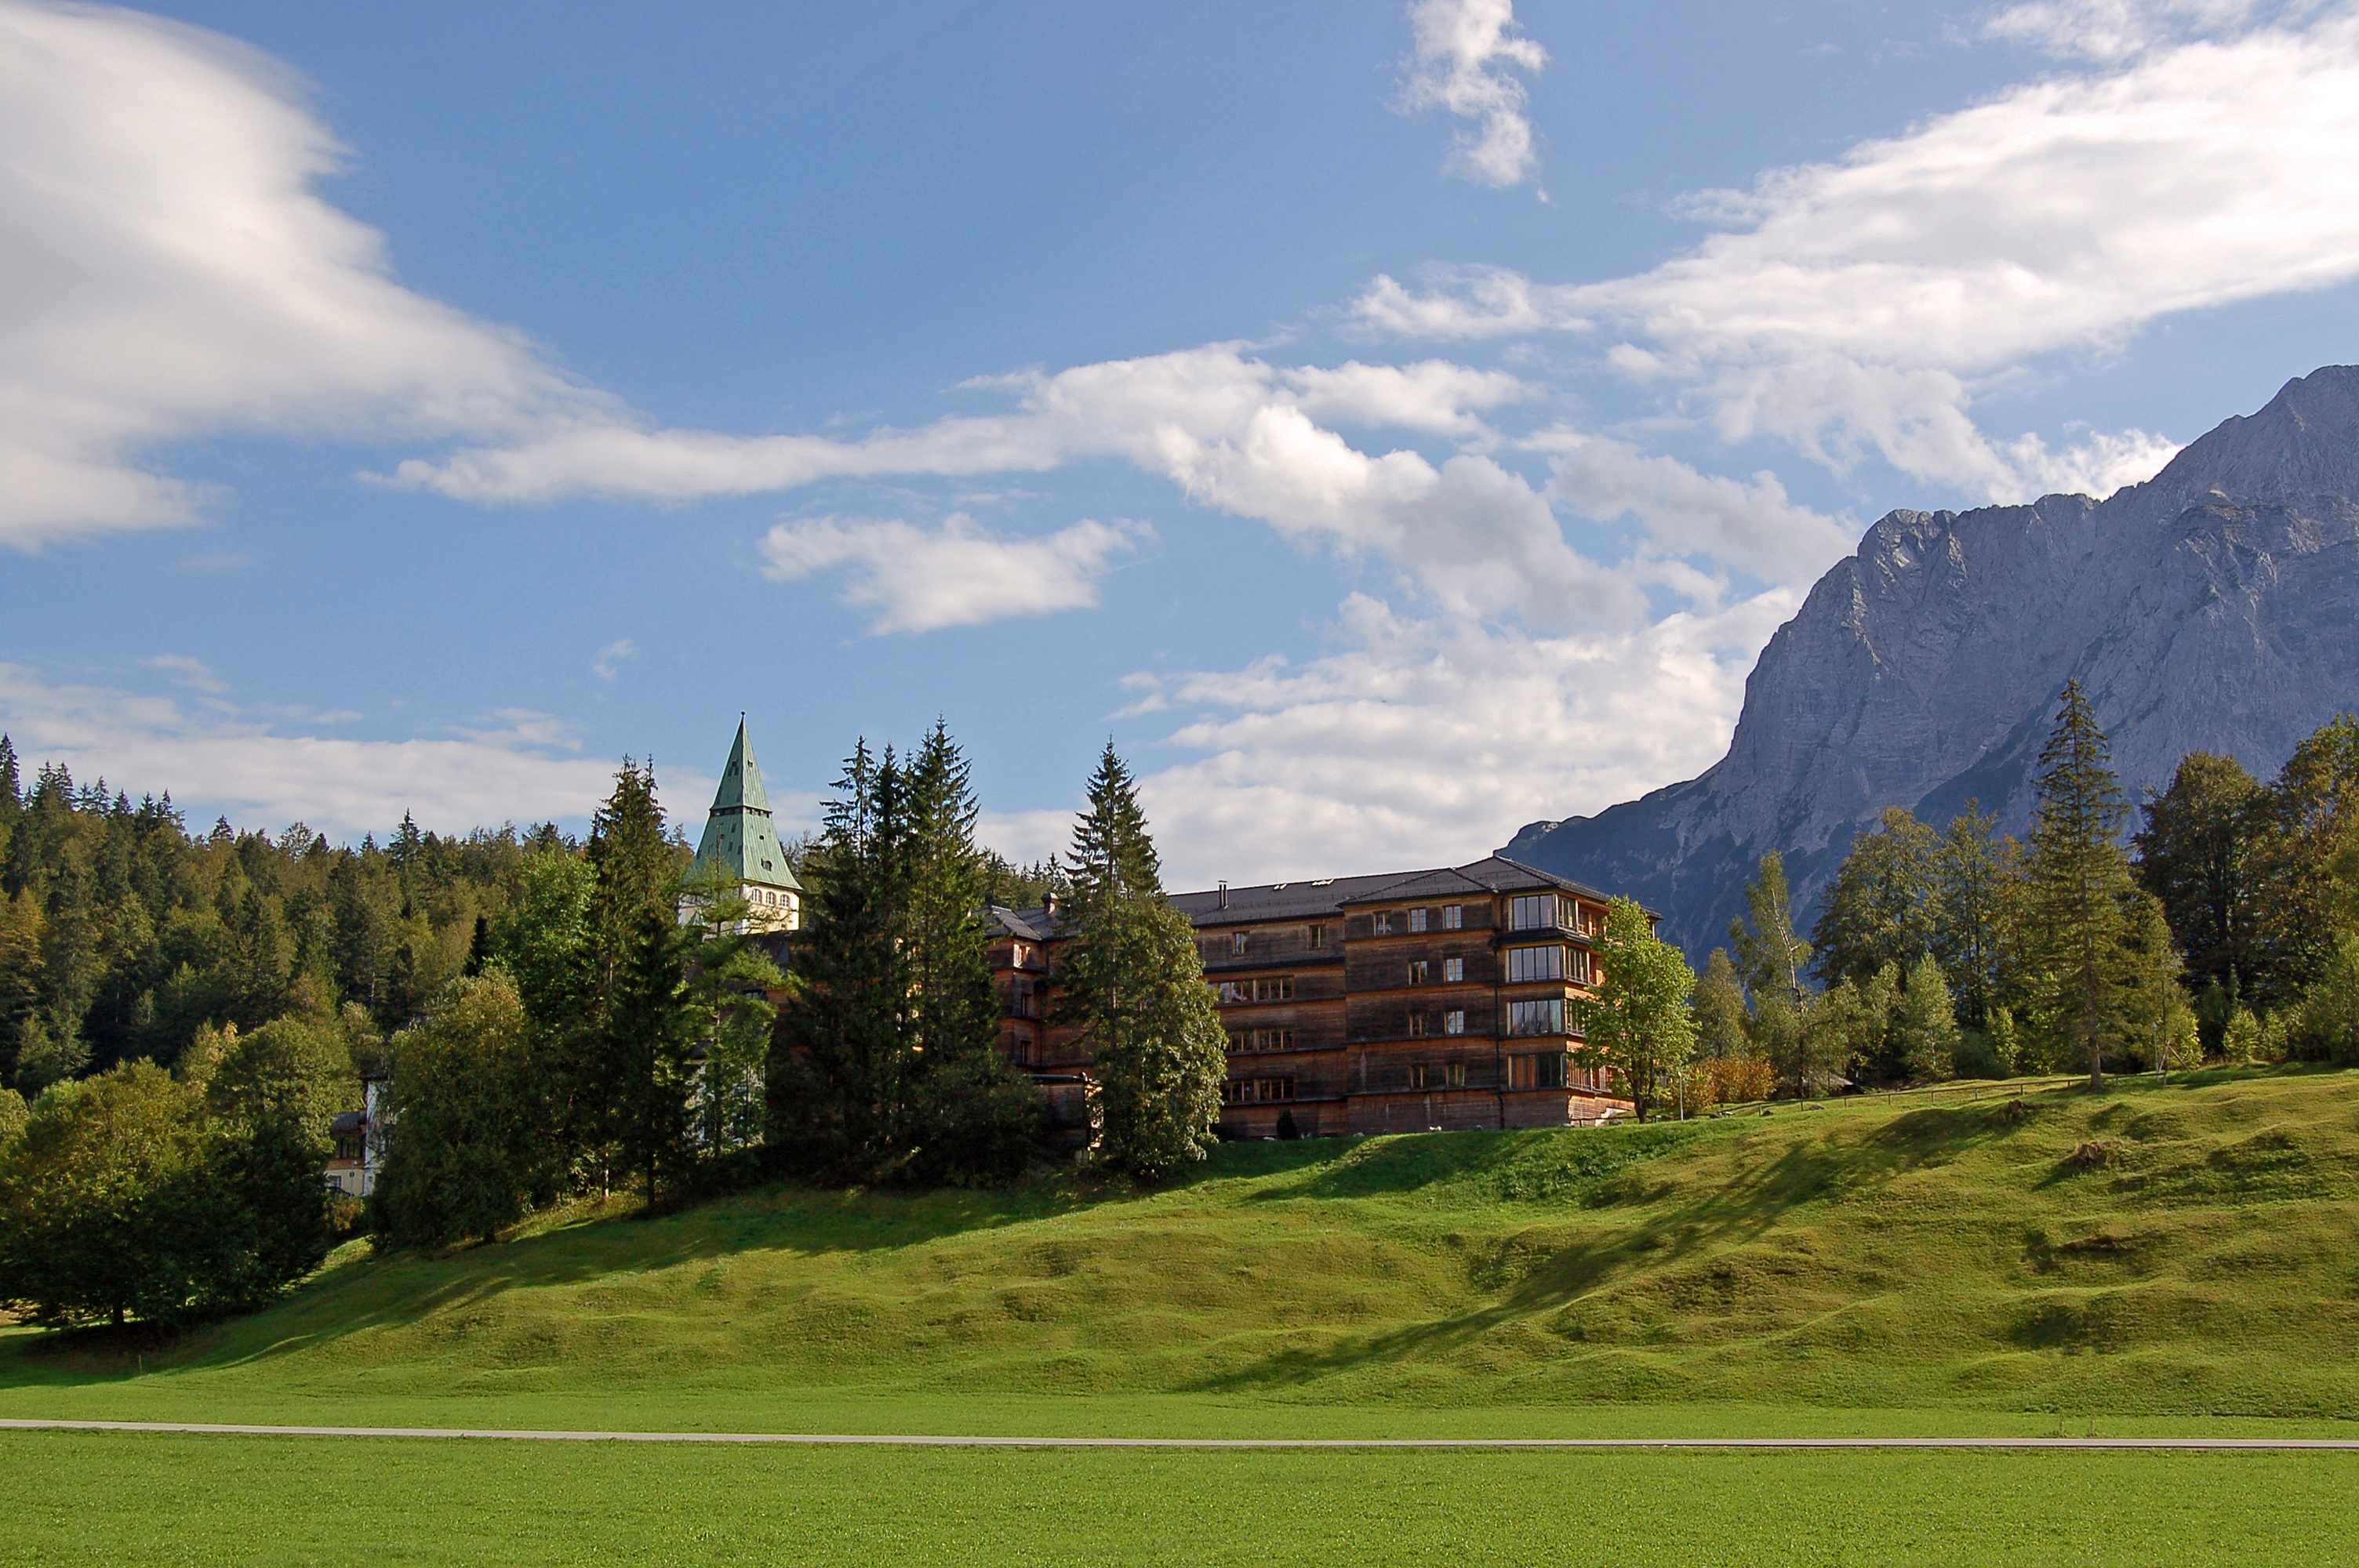 The 2022 G7 Summit is due to take place from 26 to 28 June 2022 at Schloss Elmau in the Bavarian Alps.